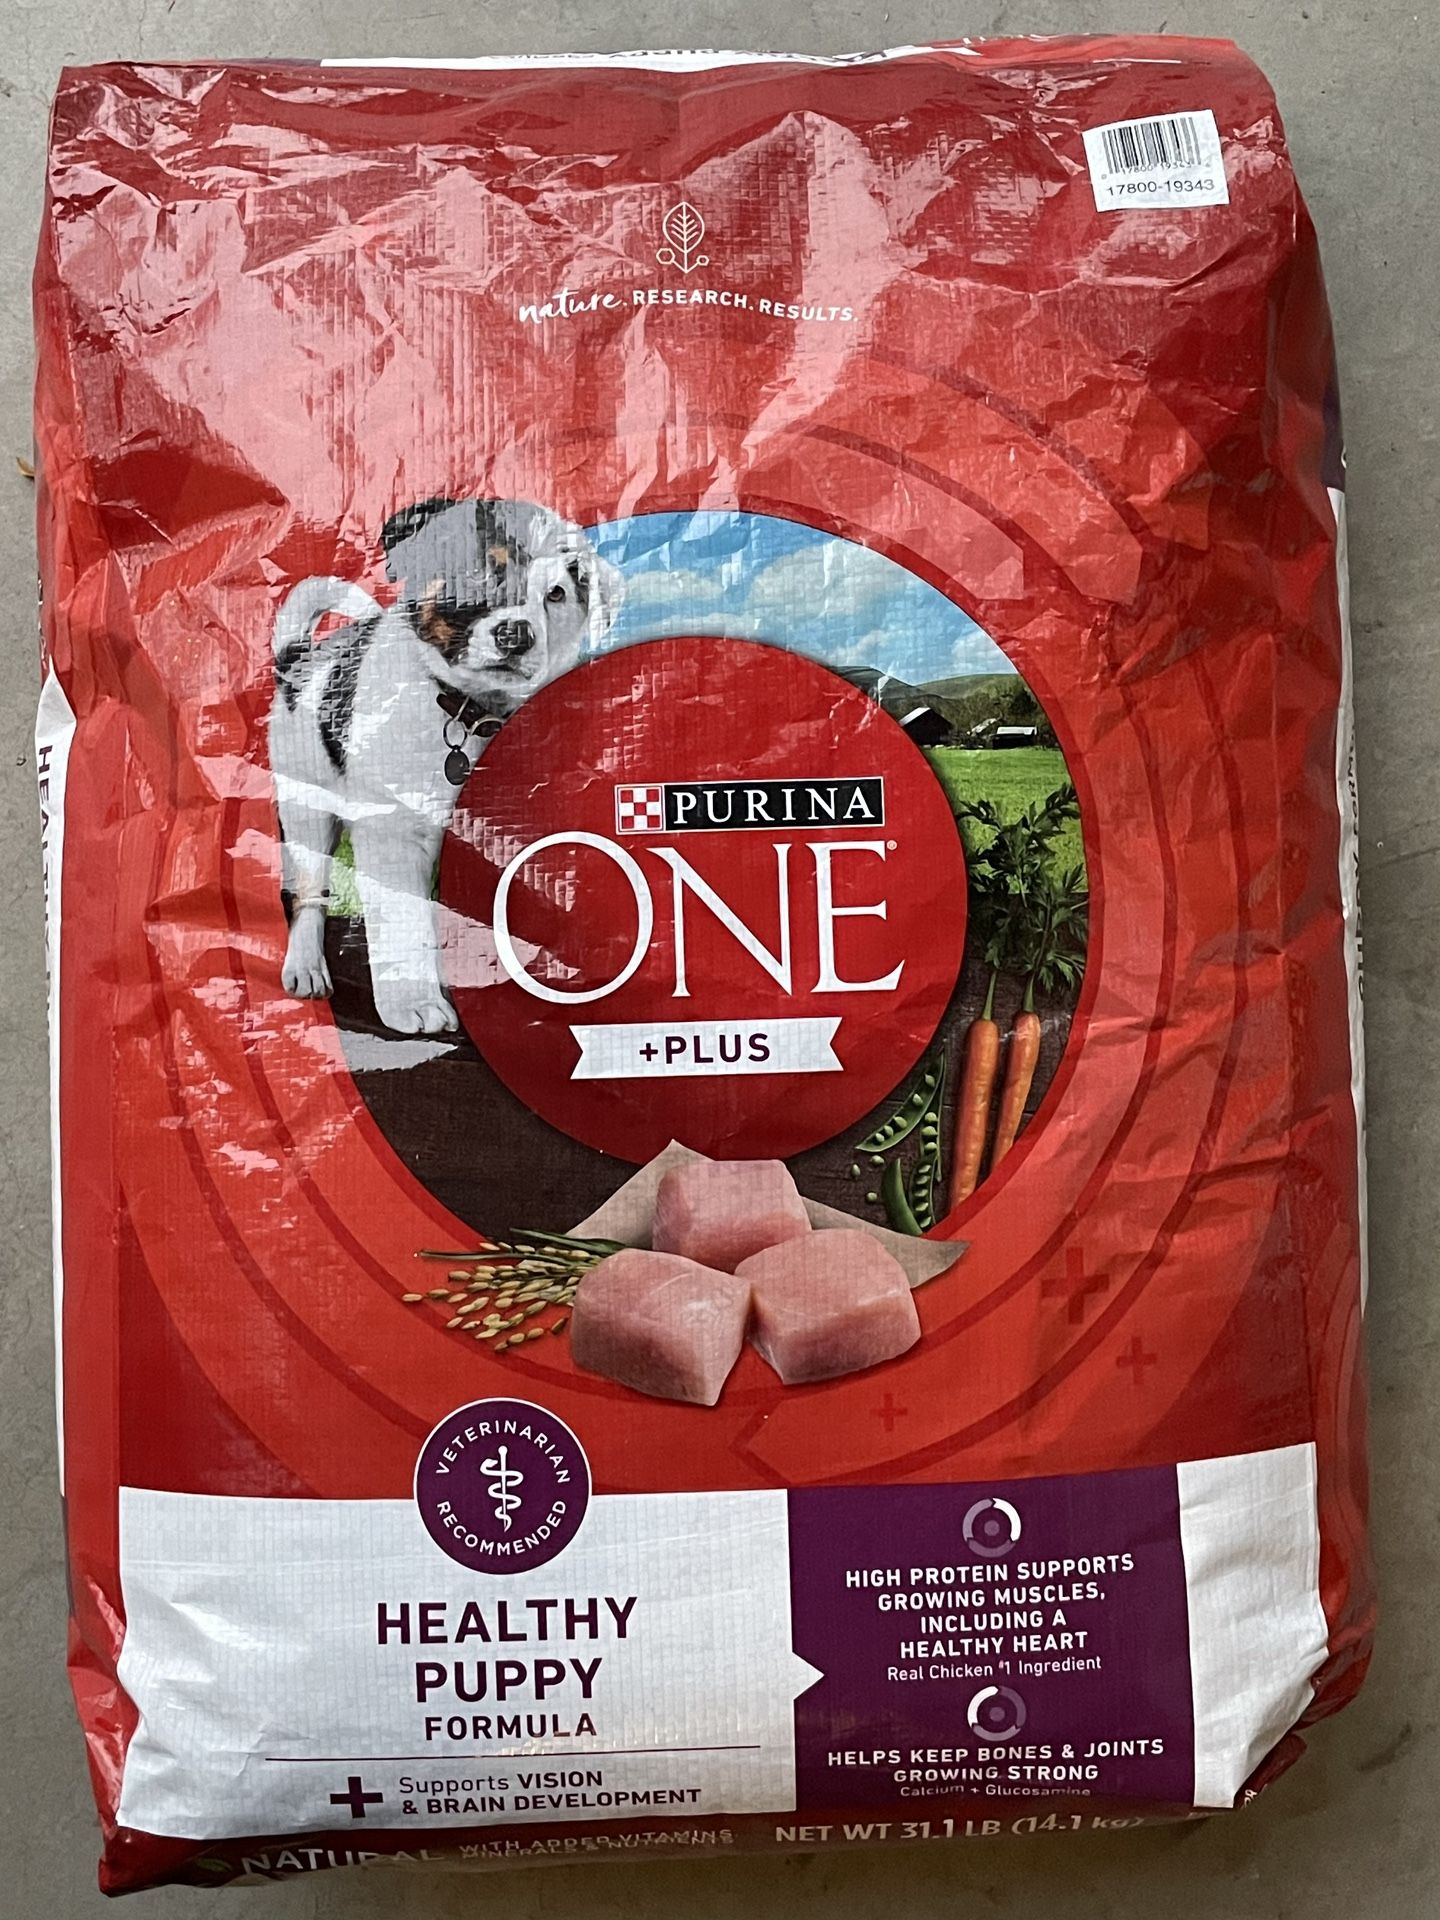 Purina ONE +Plus Puppy Dog Dry Food - Chicken, Natural, High-Protein 31lbs